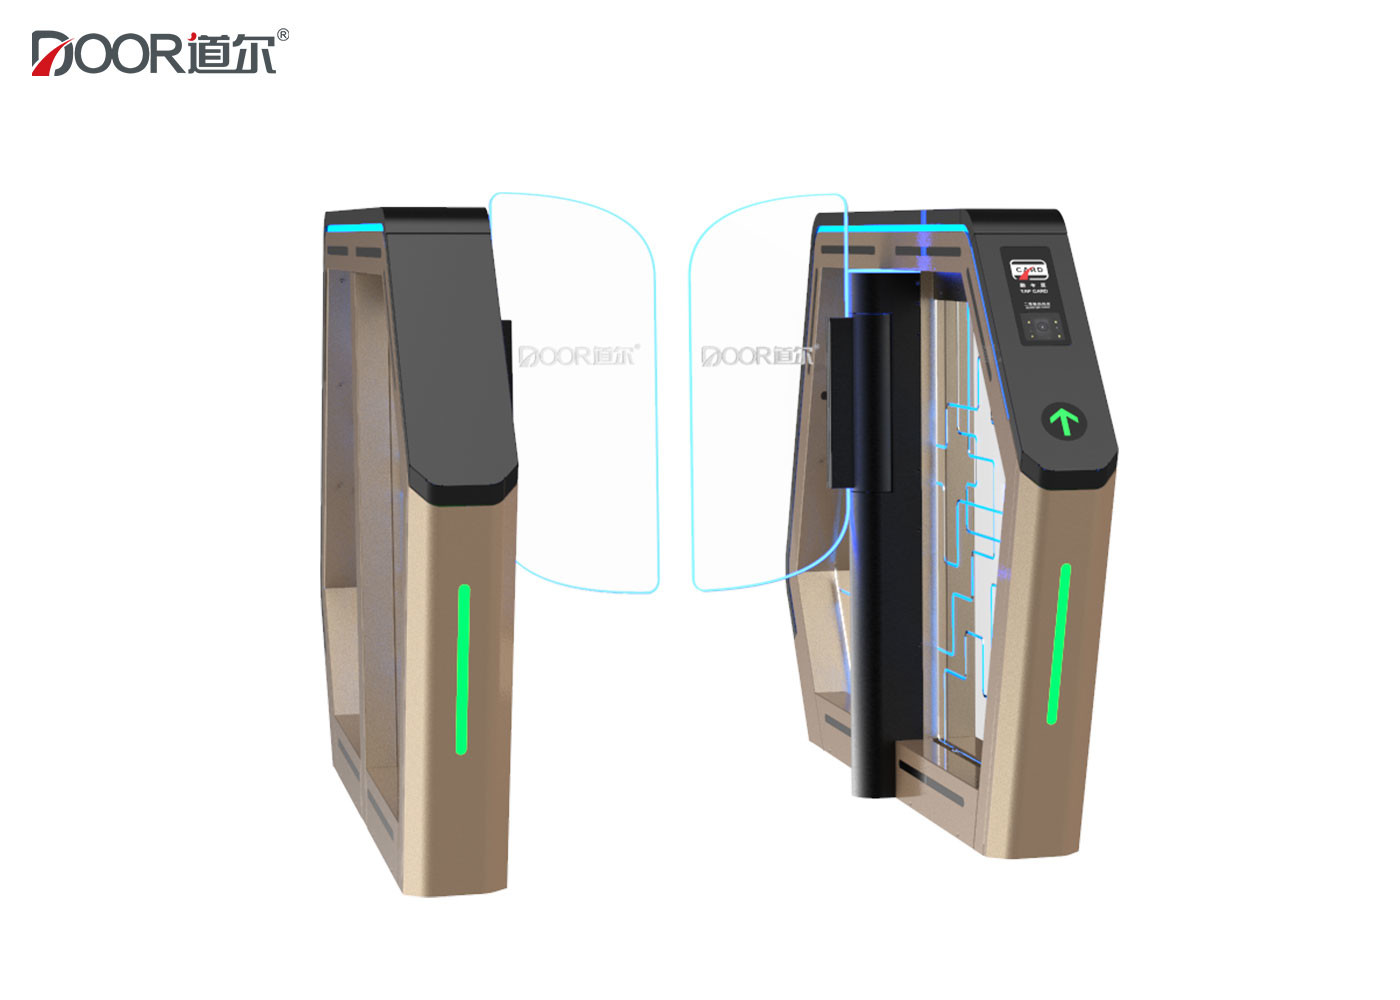 Dry Contact Signal High End Access Control Turnstile With Servo Motor 8million Times MBCF